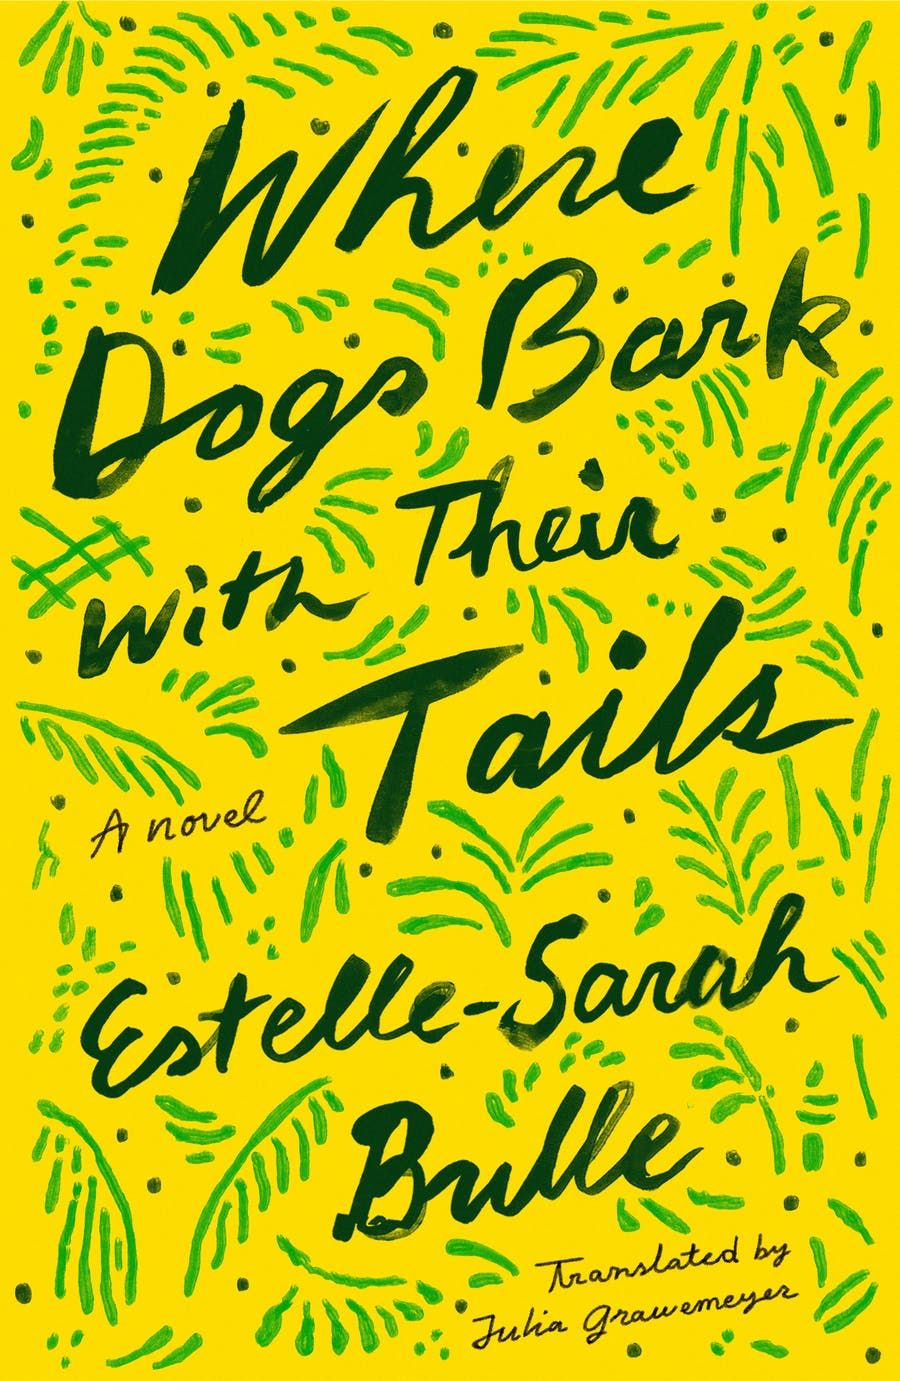 Where Dogs Bark With Their Tales by Estelle-Sarah Bulle